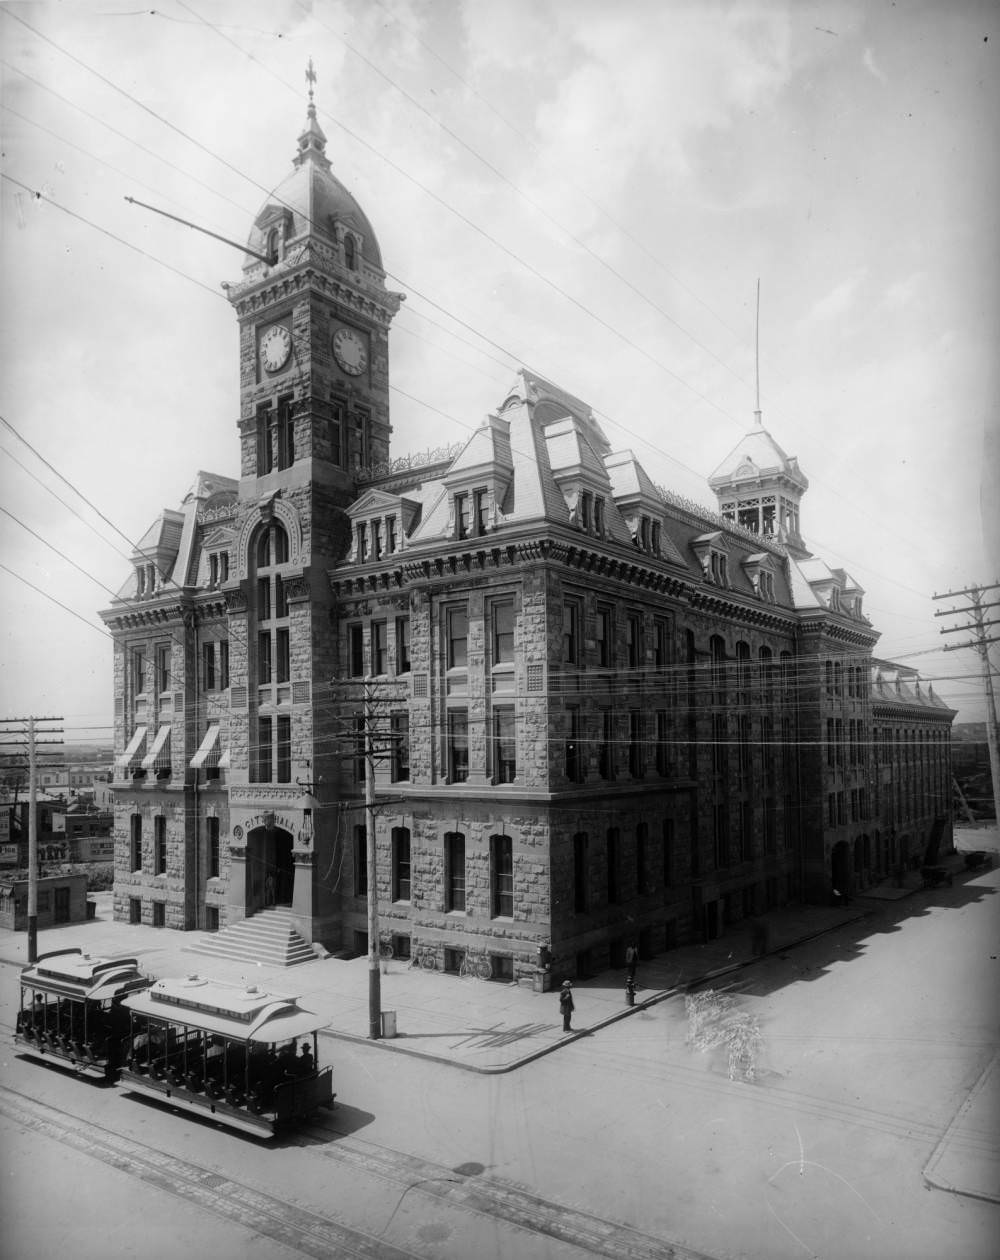 Denver City Hall on 14th Street, featuring a trolley car and bicycles, 1900s